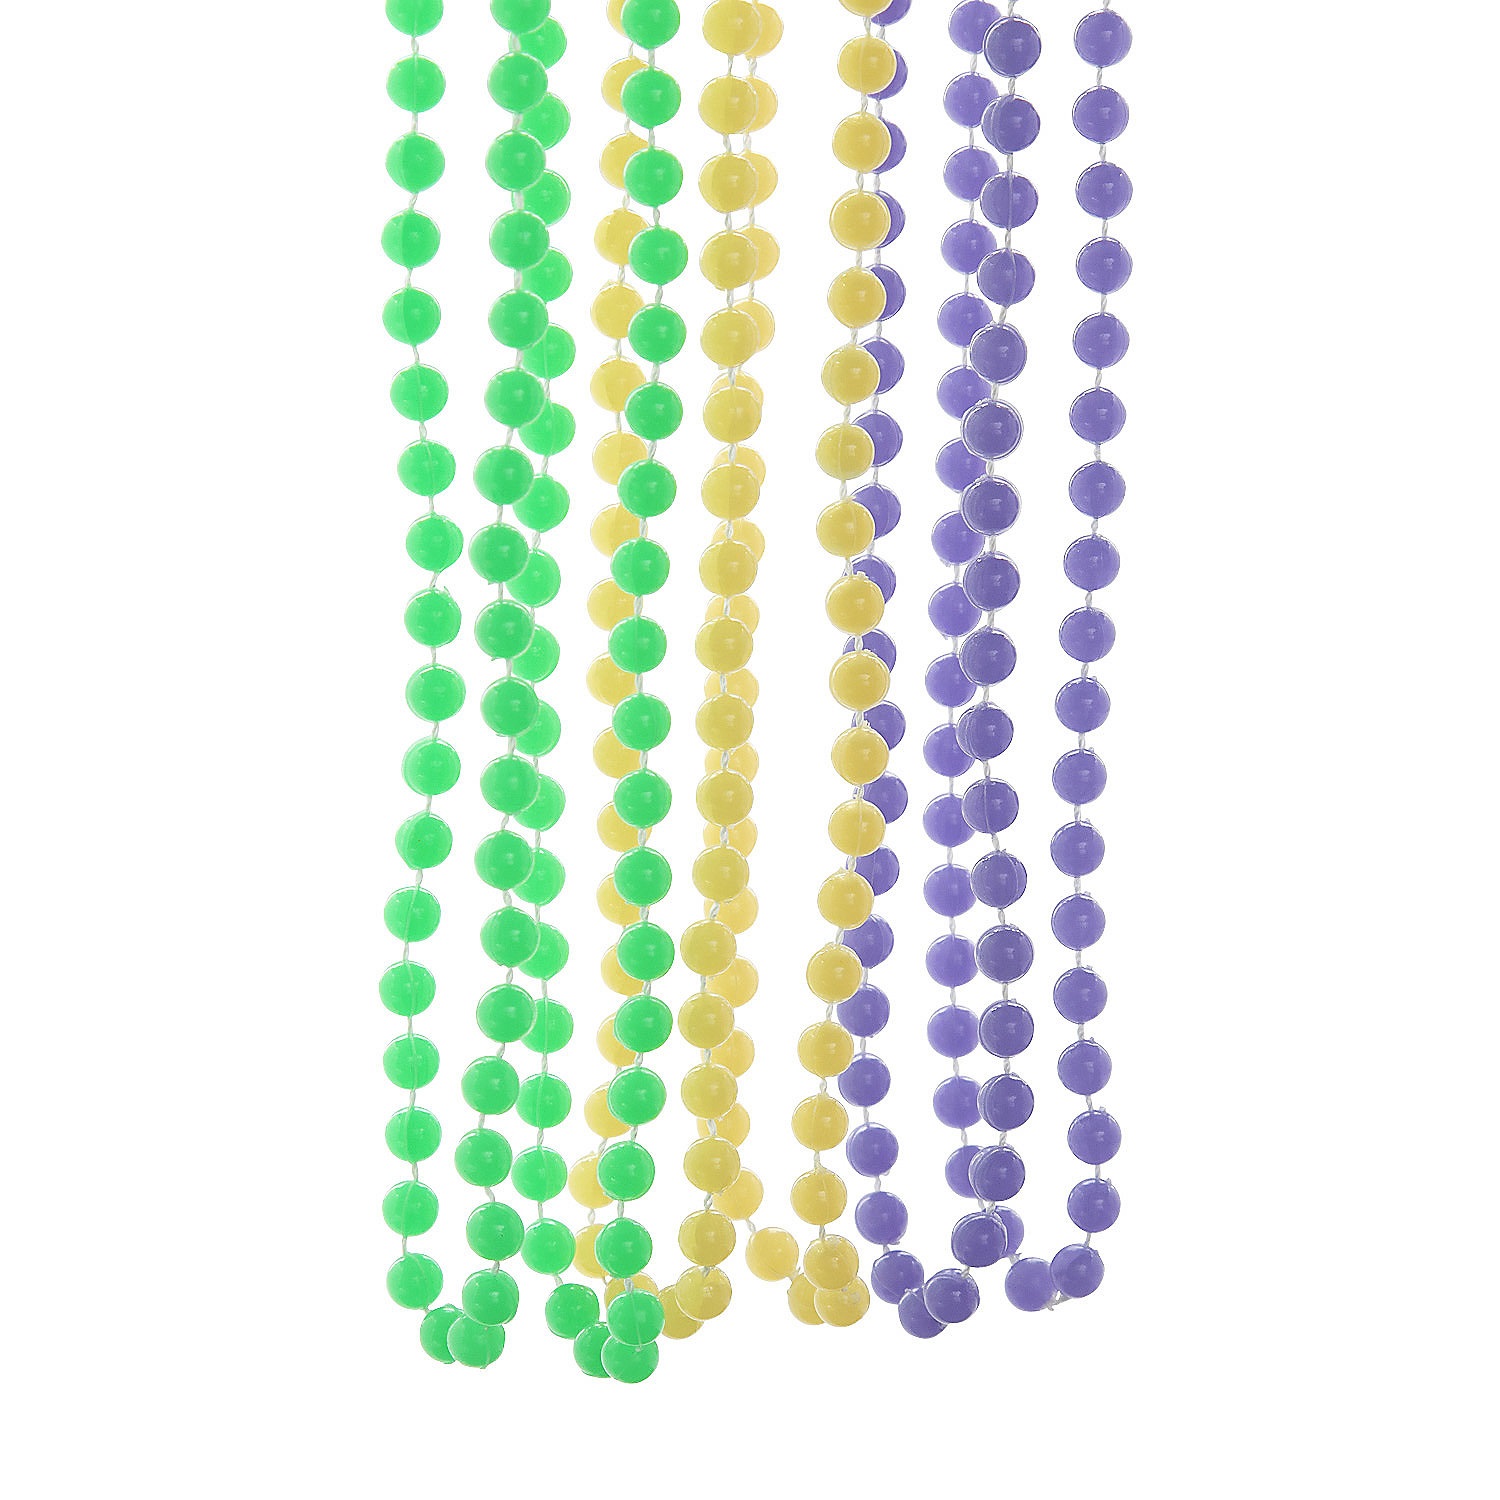 glow-in-the-dark-mardi-gras-beaded-necklaces-48-pc-_13961753-a01